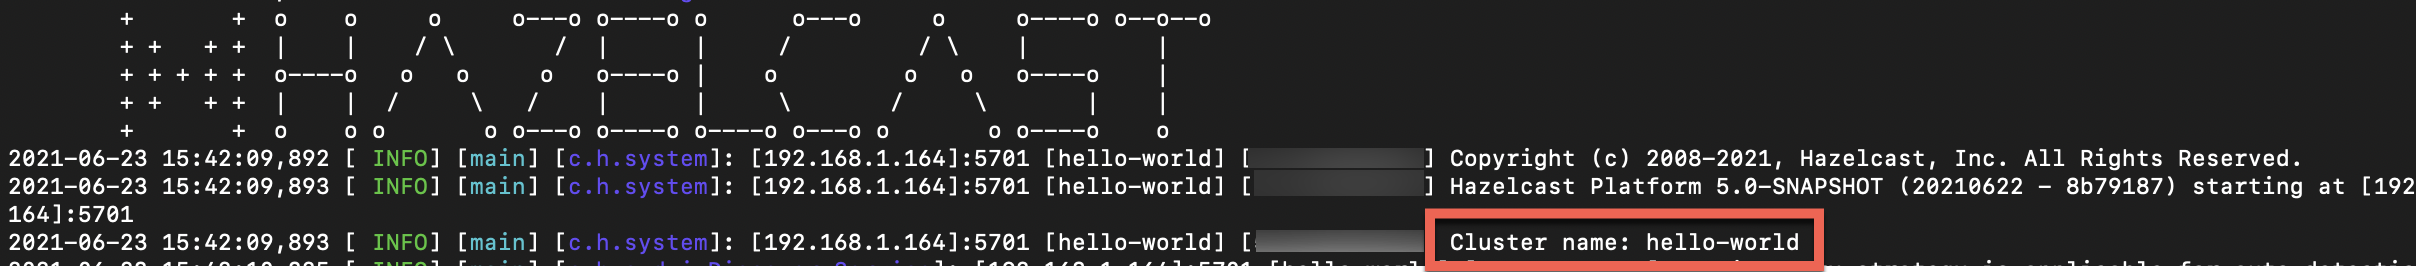 Platform console displays the cluster name 'hello-world'